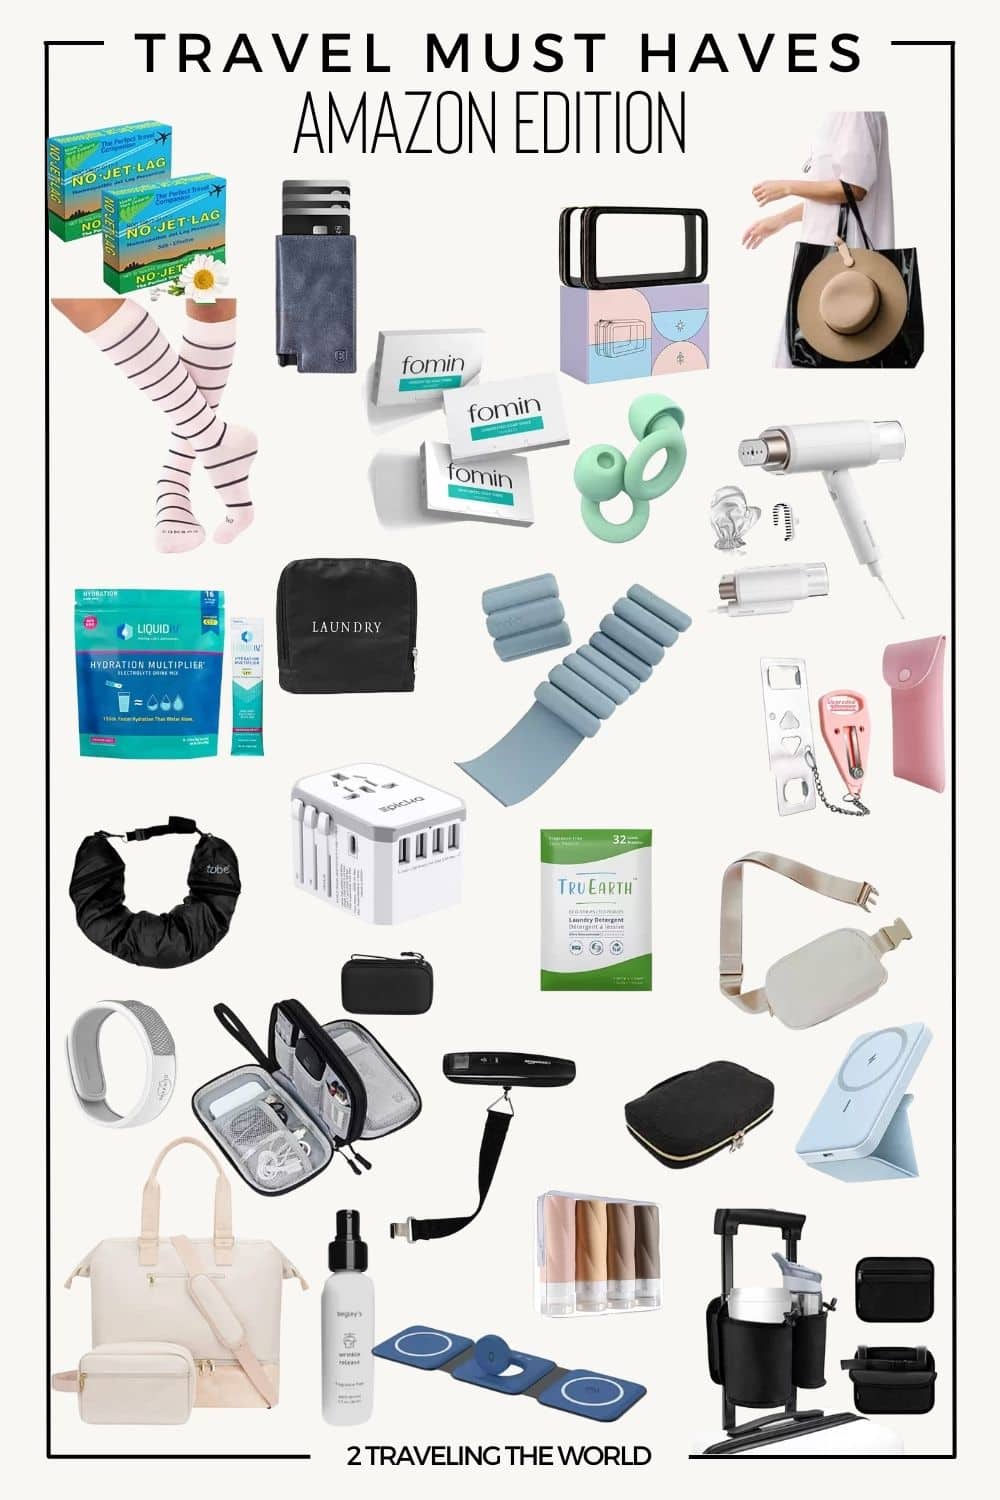 Top Travel Essentials  Must-Have Travel Accessories and Products 